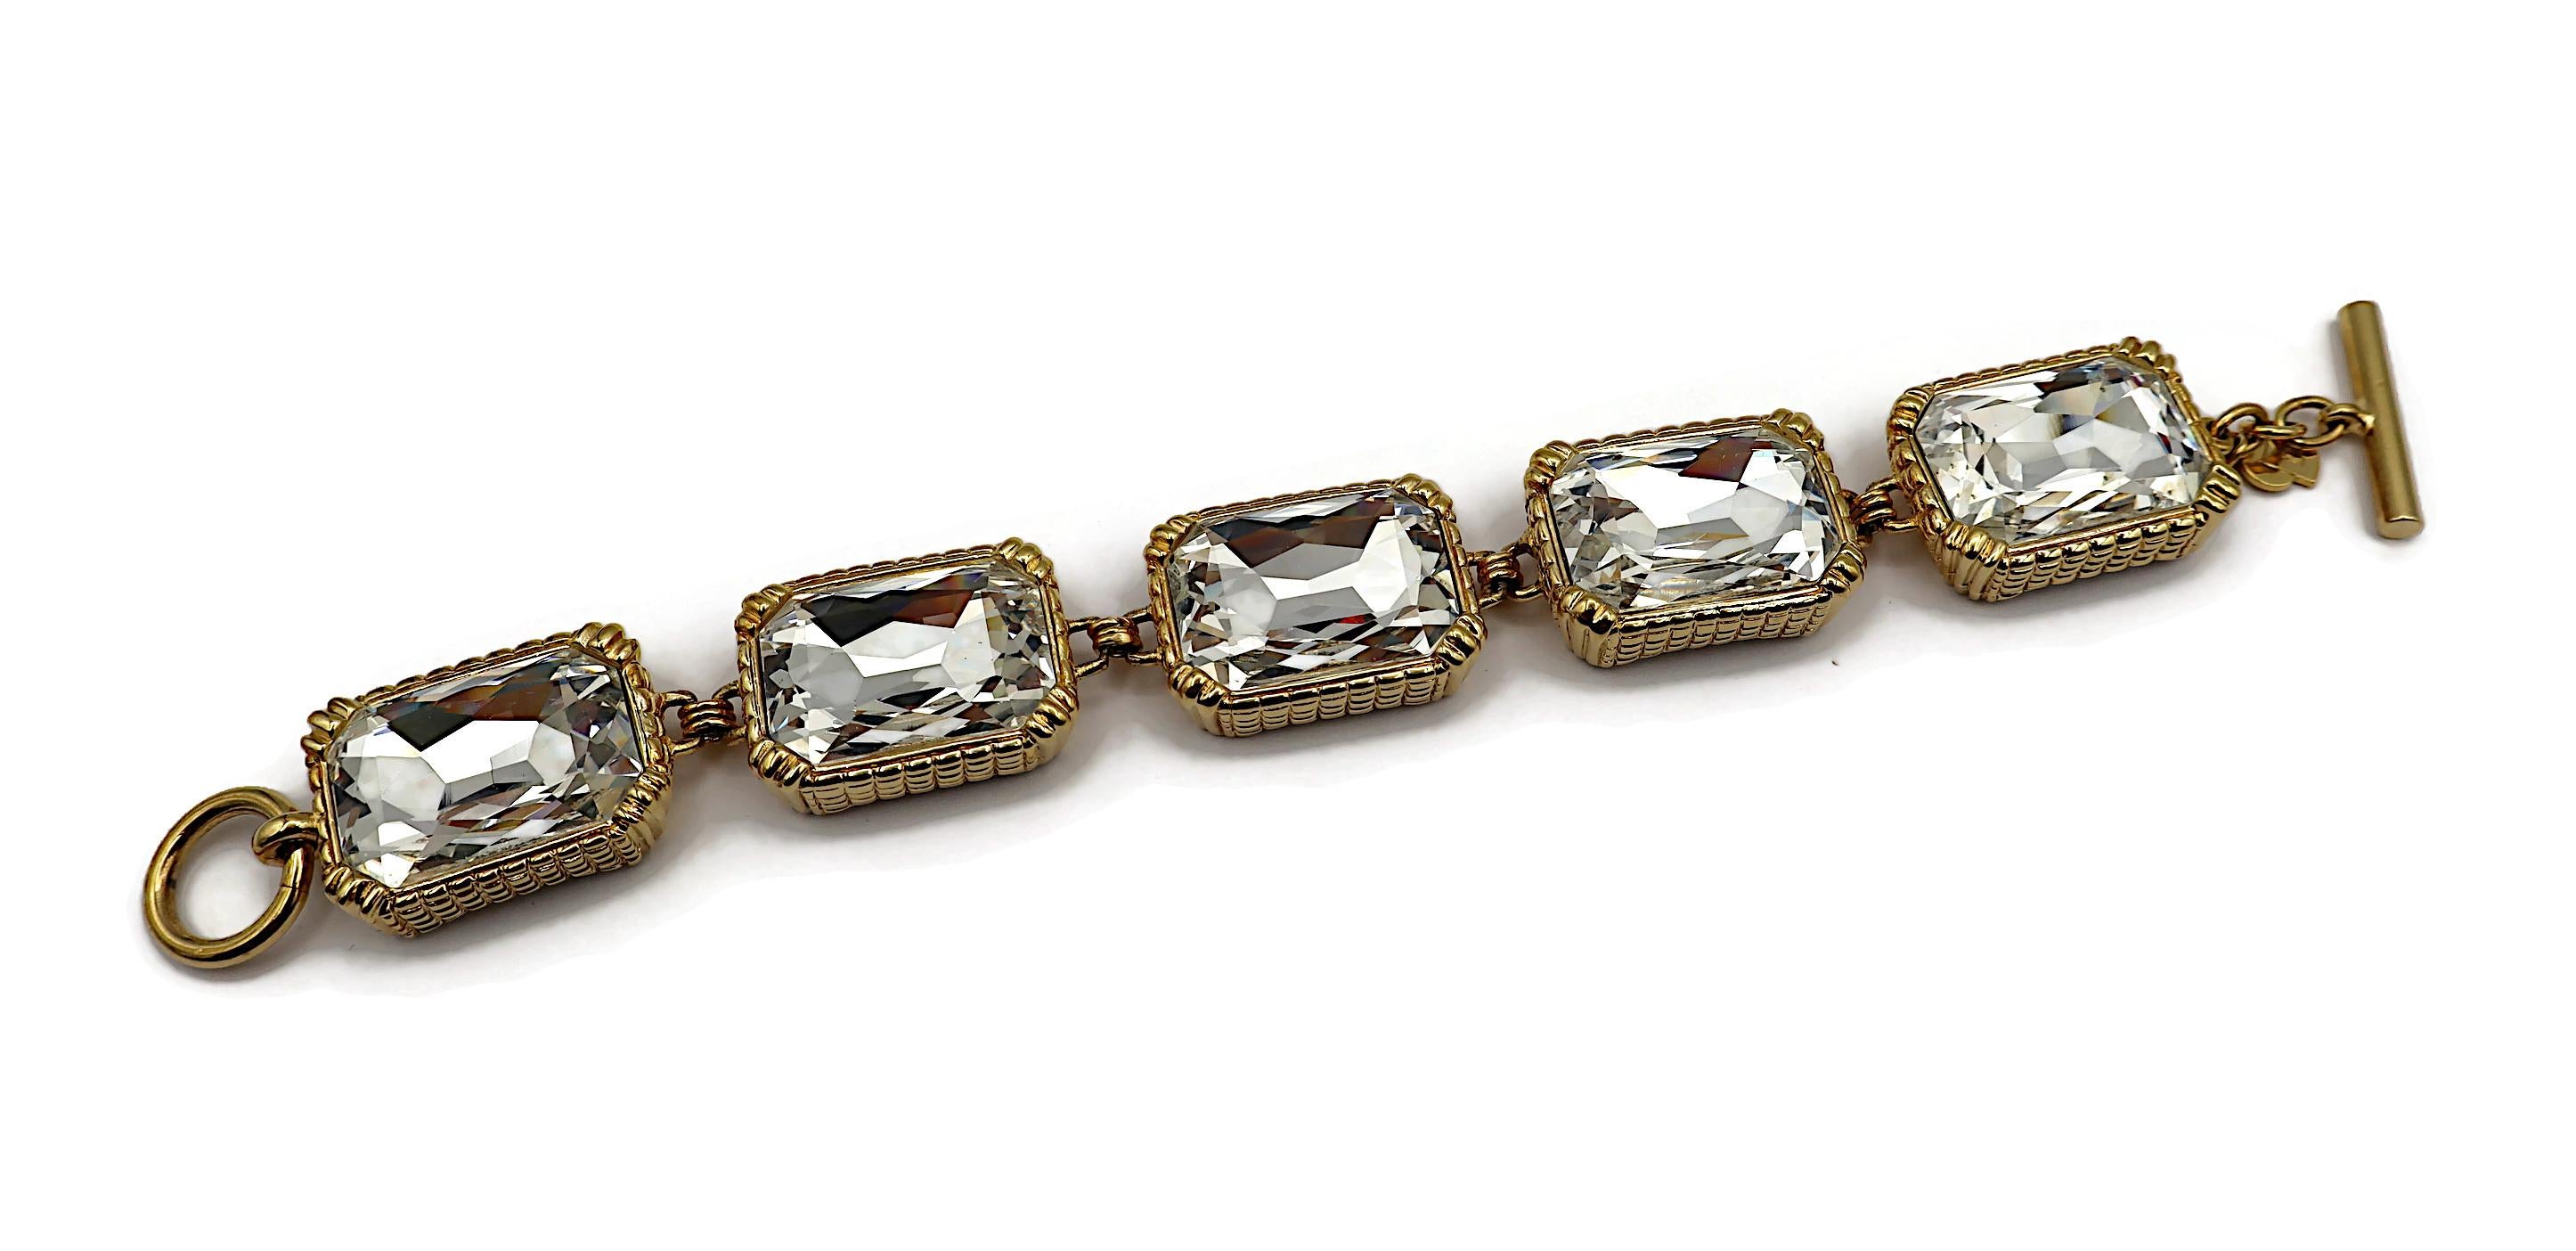 CHRISTIAN DIOR vintage gold tone rectangular link bracelet embellished with massive clear crystals.

T-bar and toggle closure.

Embossed CHR. DIOR Germany.

Indicative measurements : length approx. 22 cm (8.66 inches) / width approx. 2.4 cm (0.94